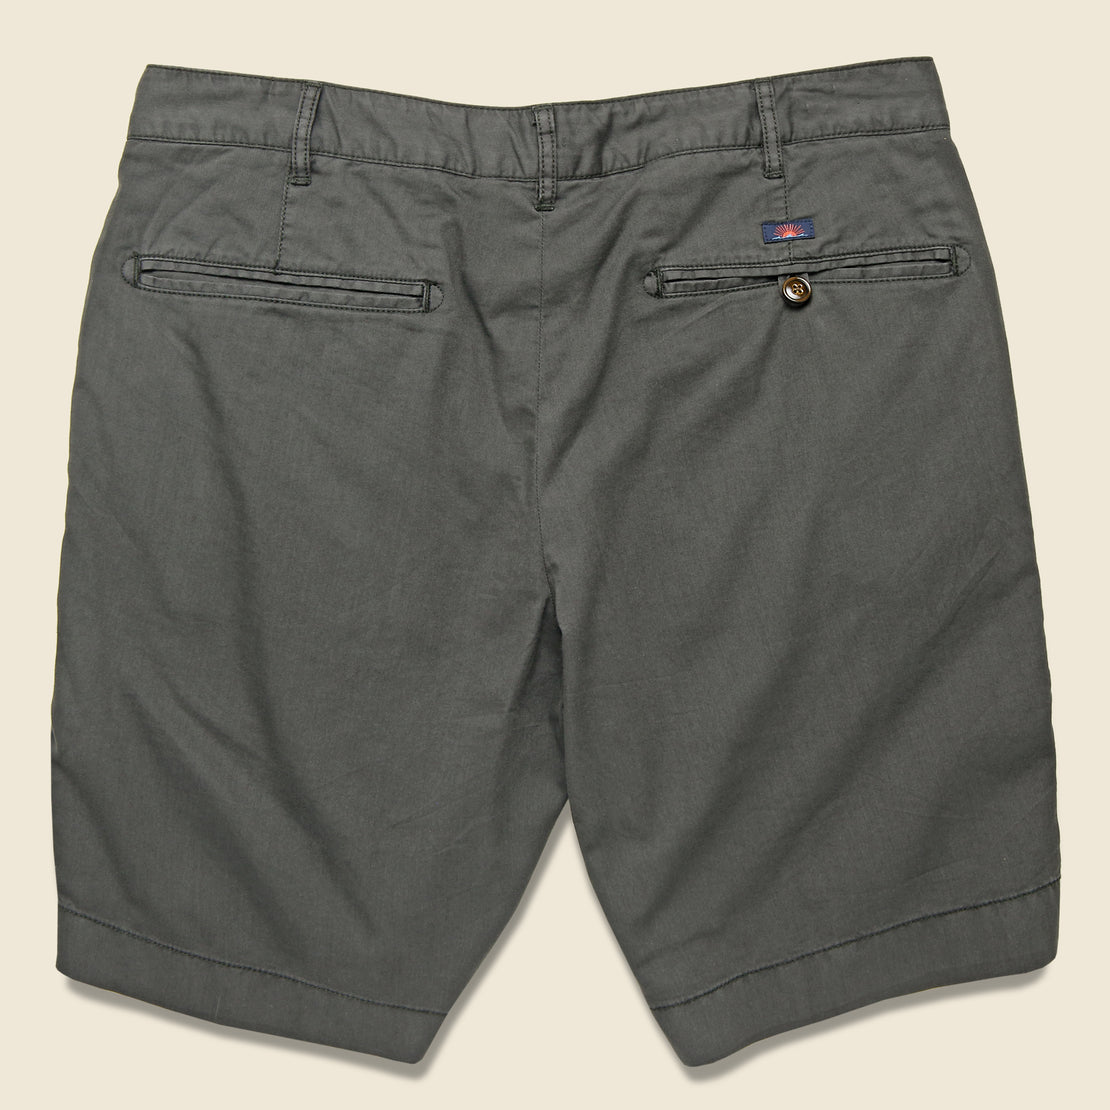 Bay Short - Washed Black - Faherty - STAG Provisions - Shorts - Solid